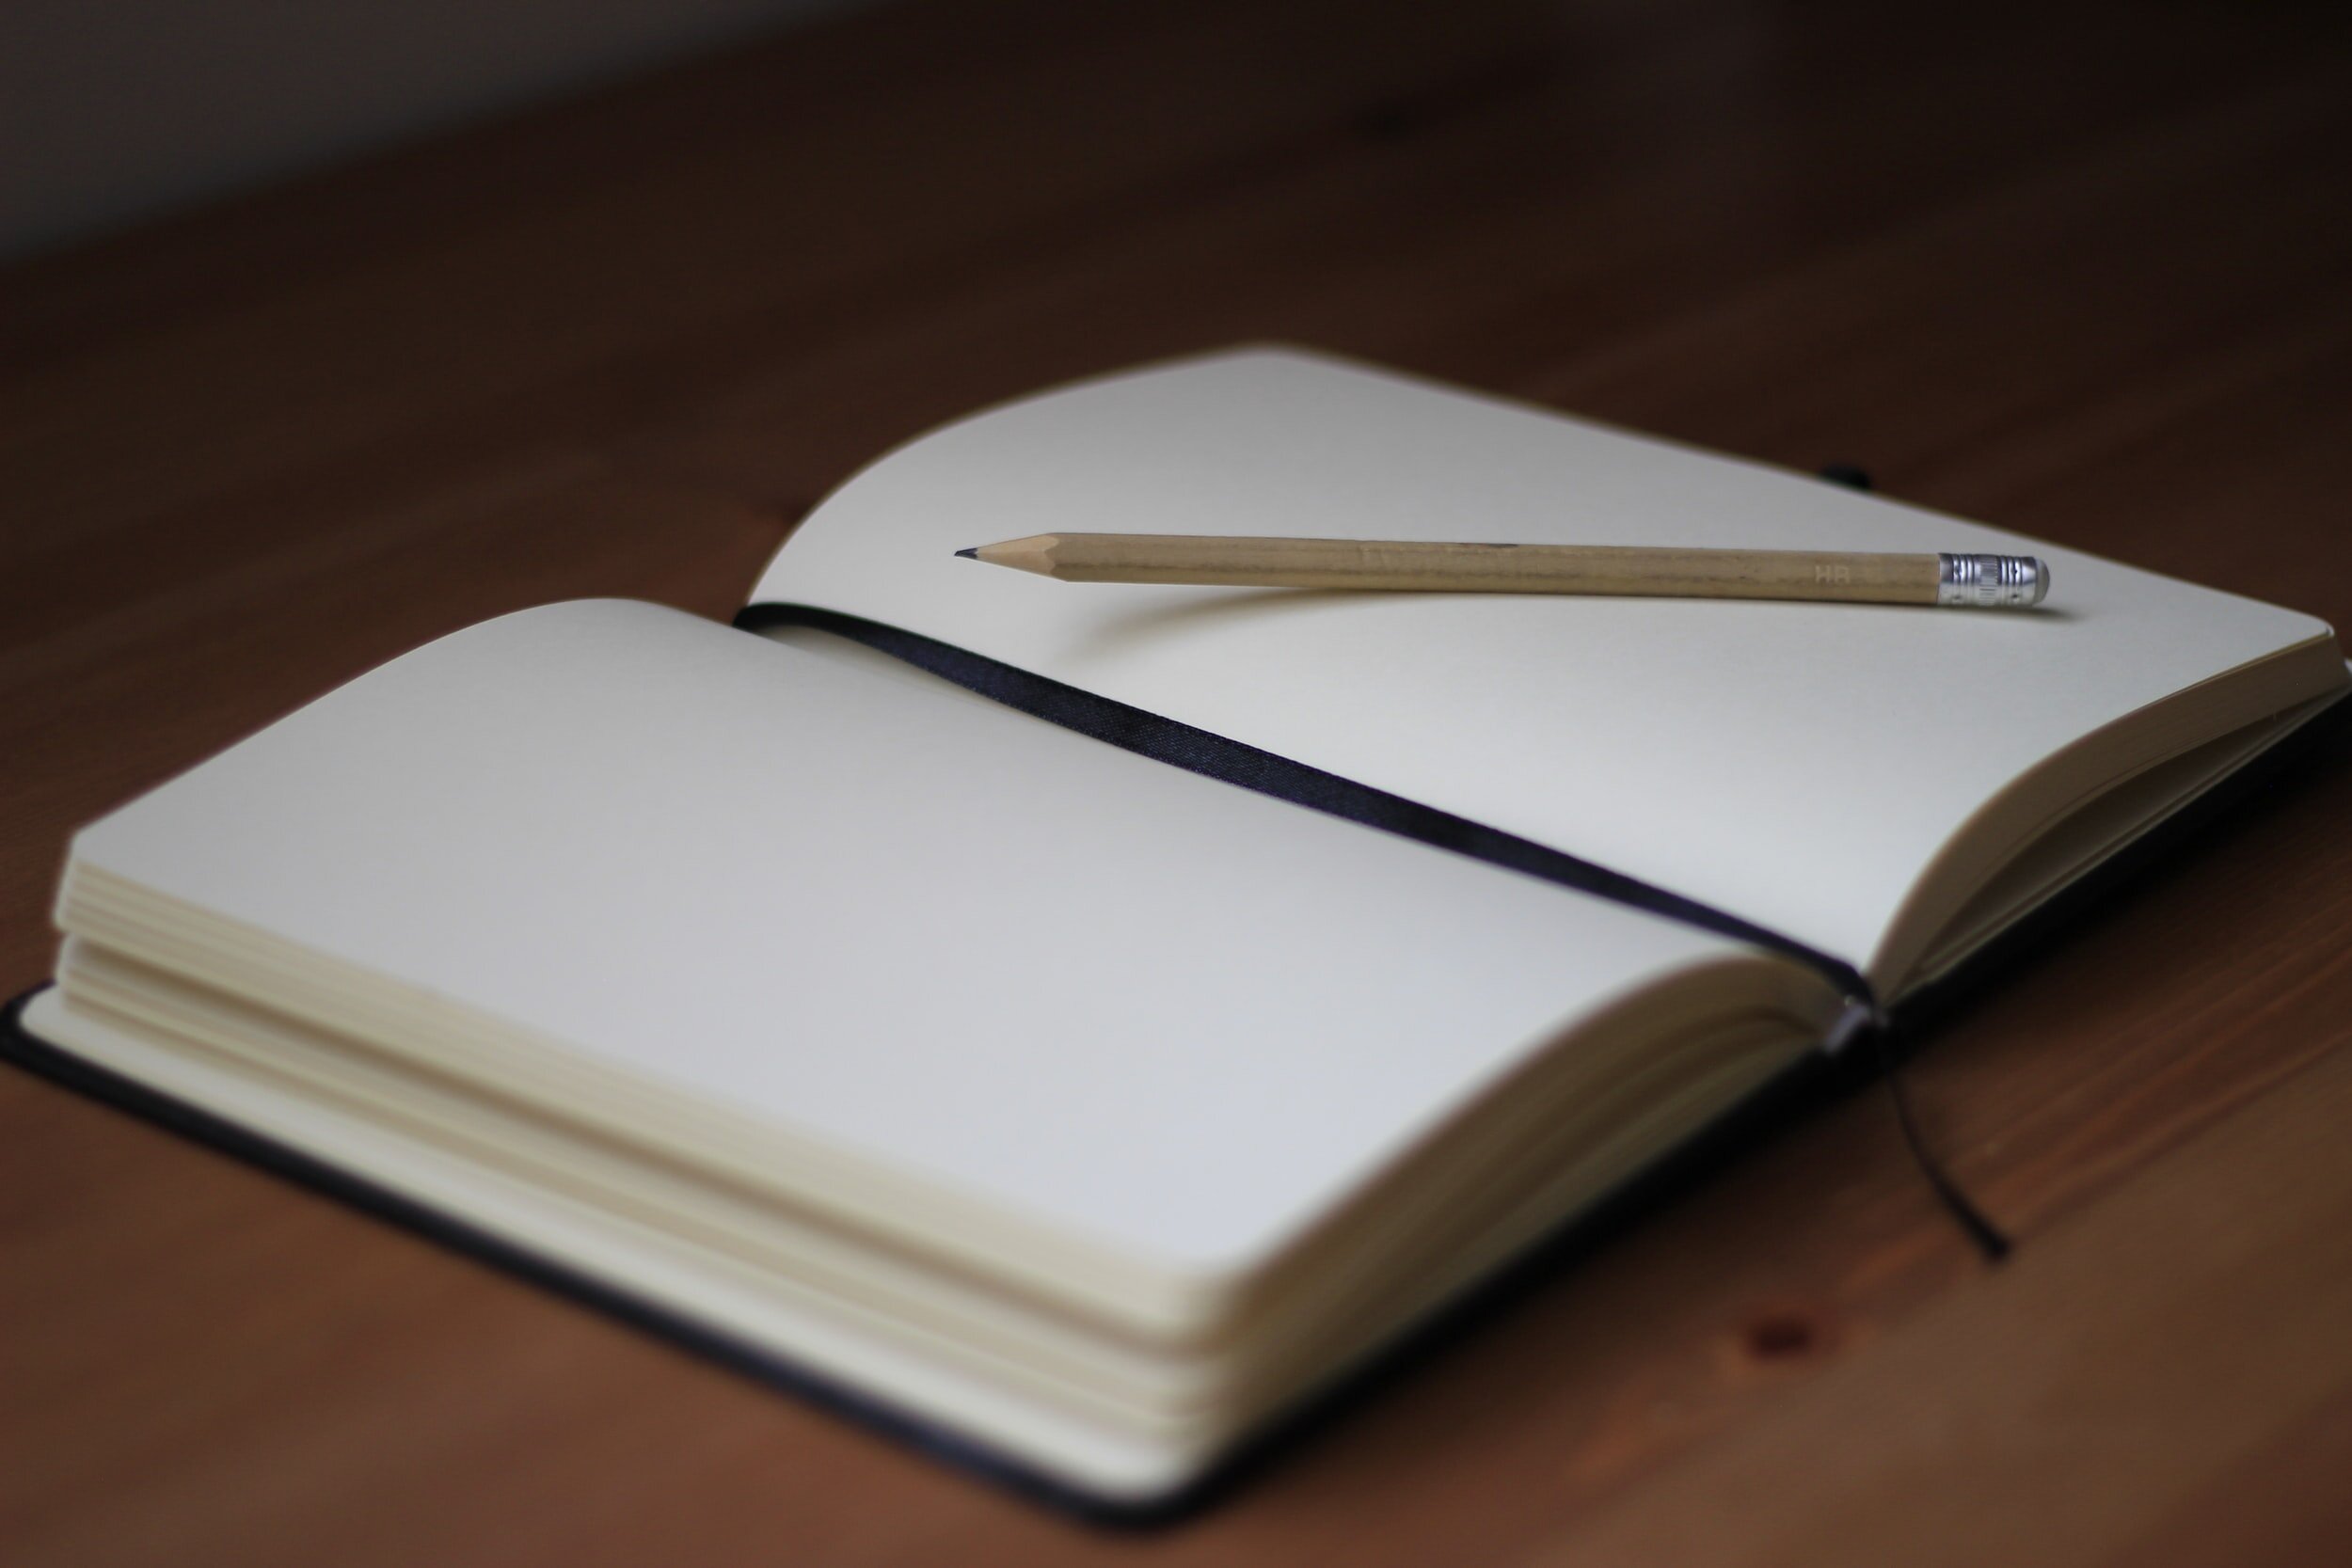 Picture of on open notebook with a pencil on top of it. Image by Jan Kahanek on Unsplash